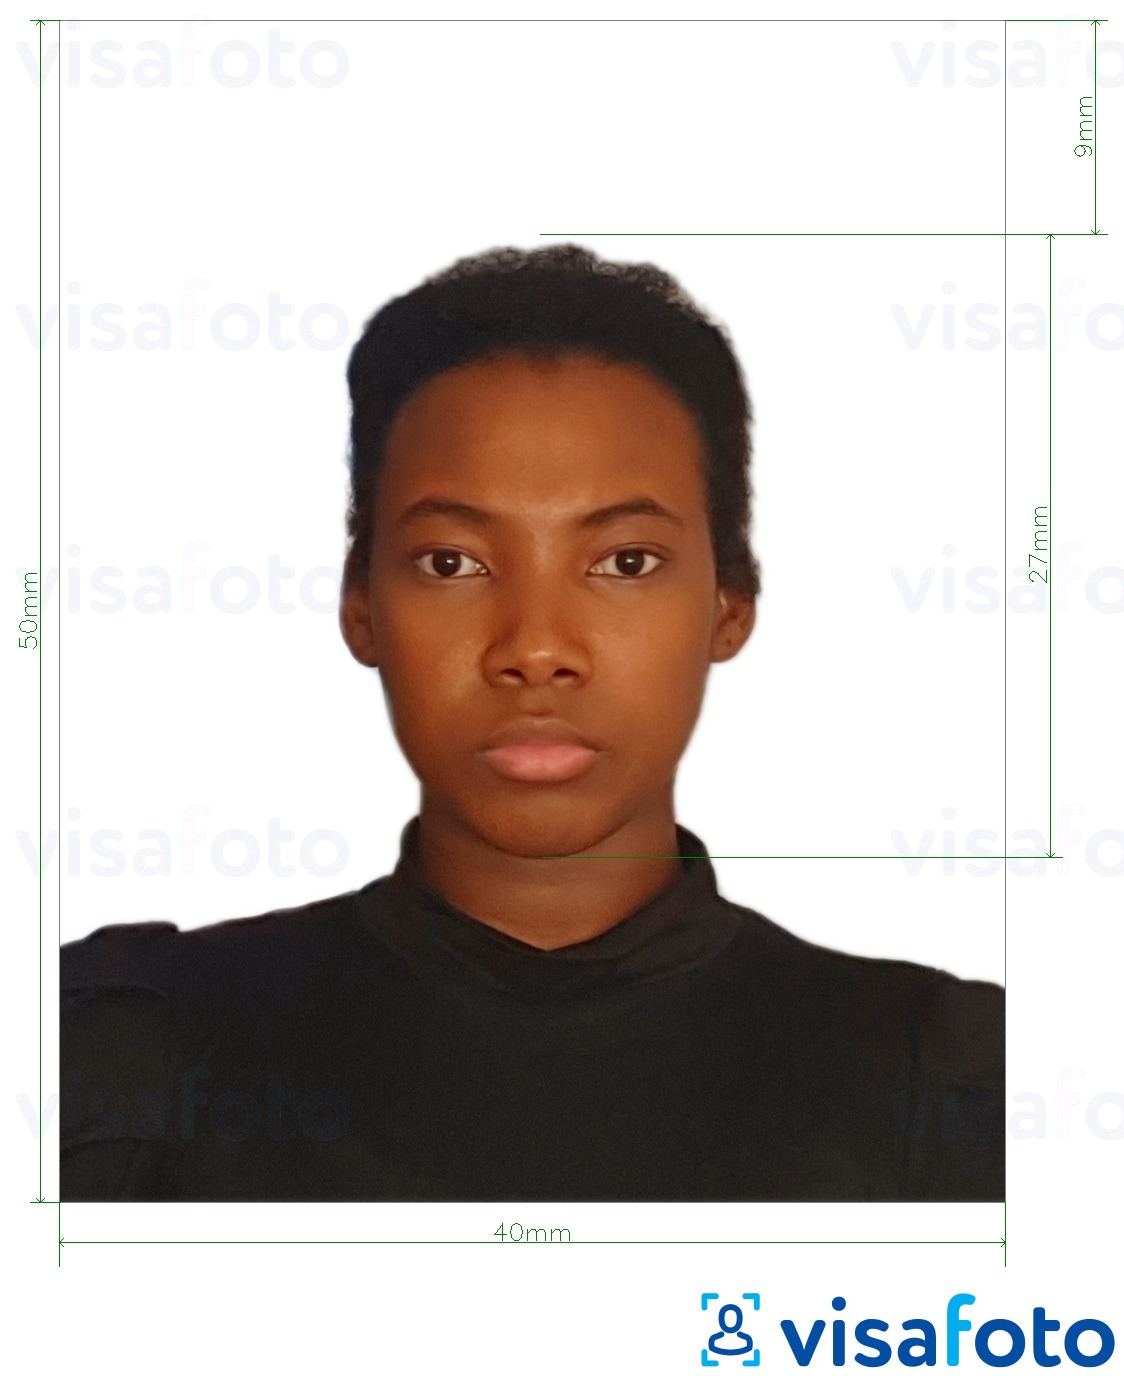 Example of photo for Colombia citizenship card (cedula) 4x5 cm (40x50 mm) with exact size specification